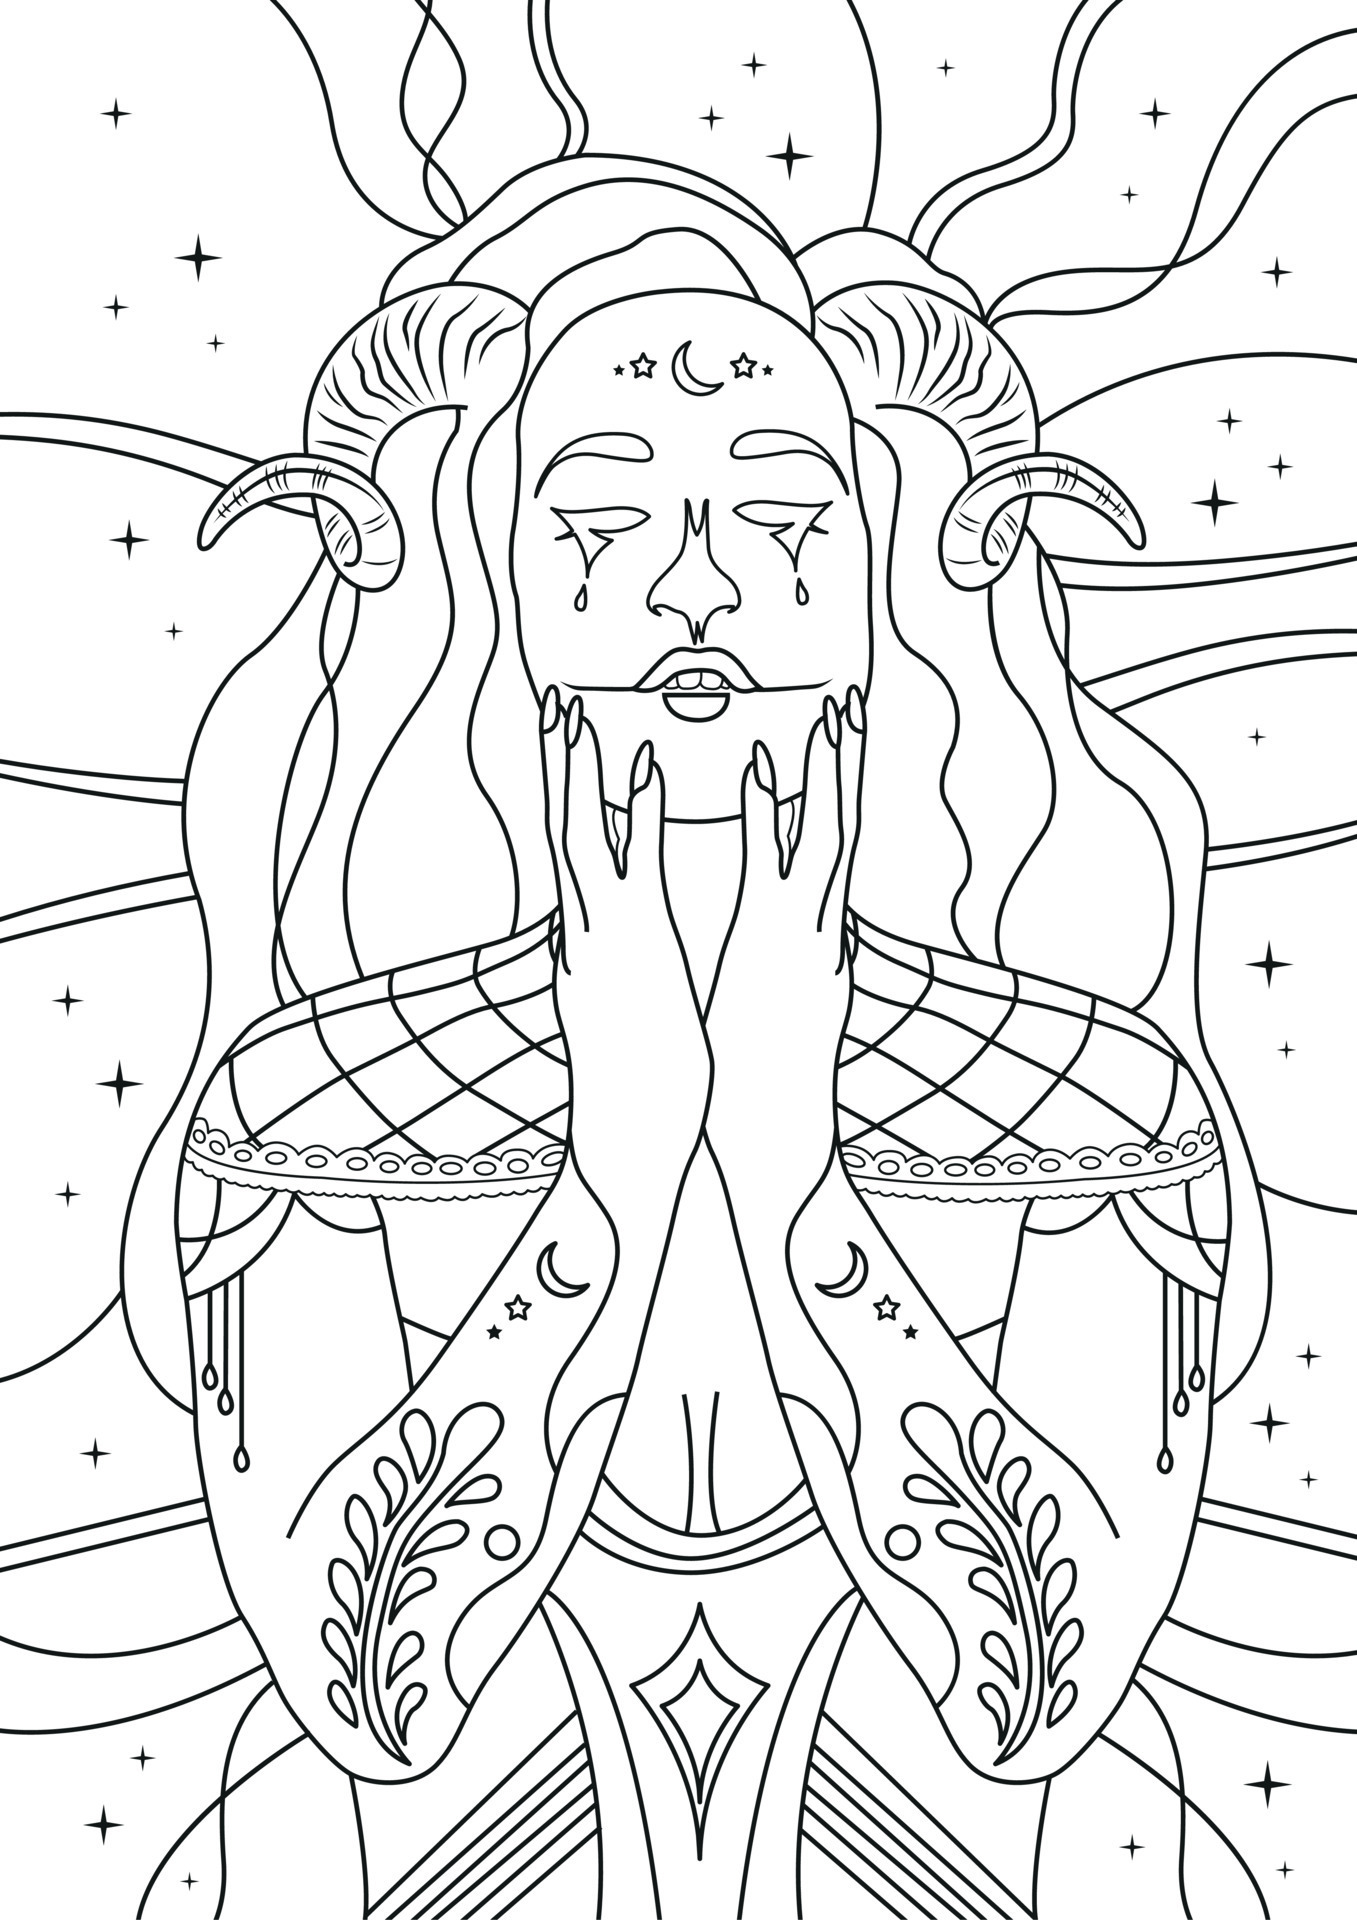 Coloring pages with demonic girl with ram horns. Coloring page for ...